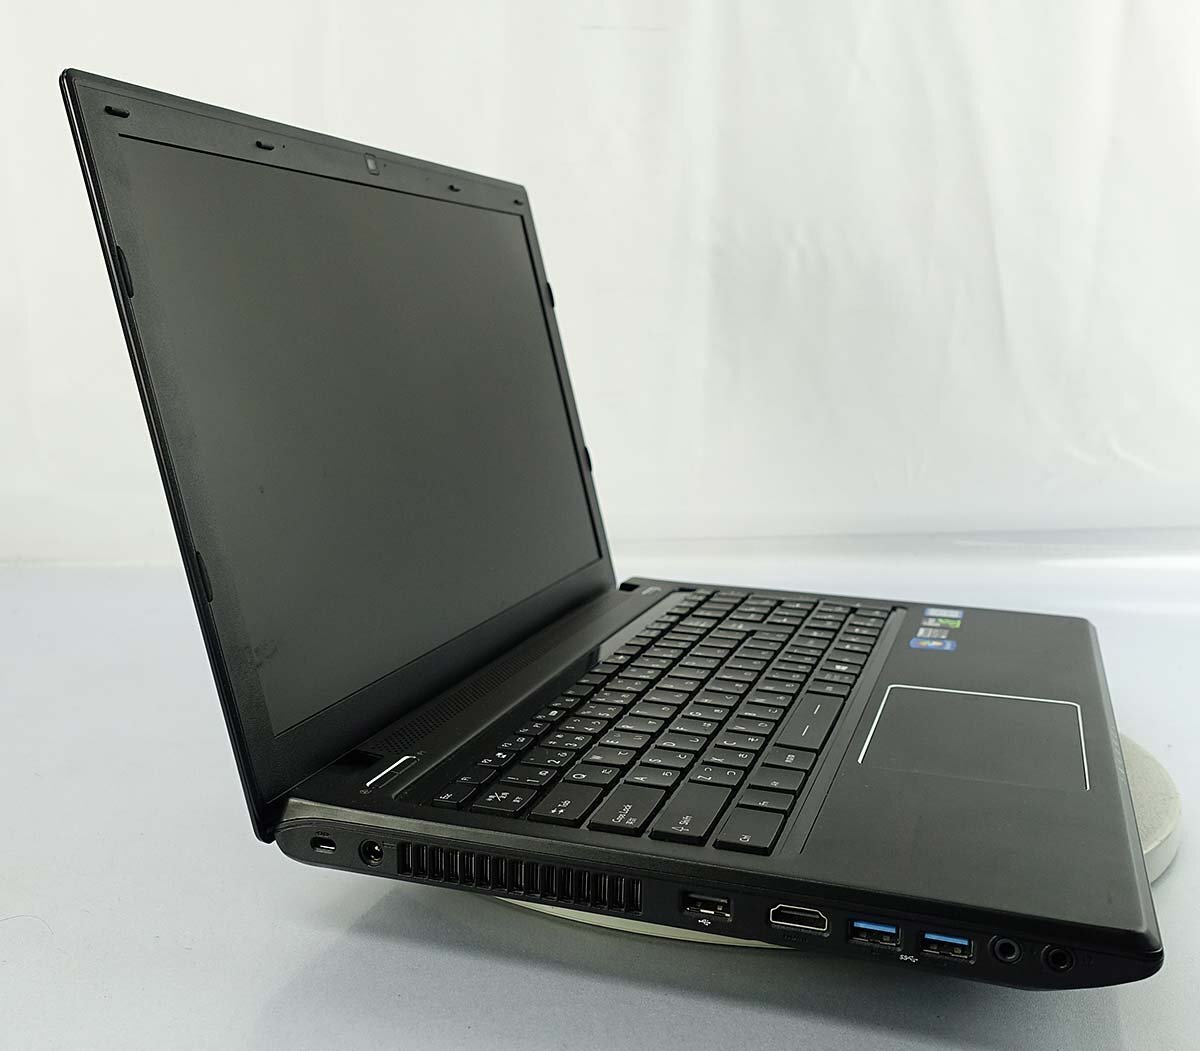 15.6 -inch Junk dospalaGALLERIA QSF960HE/Core i7-6700HQ/ memory less /HDD less /GTX960M/Windows Note PC dospara S051011K